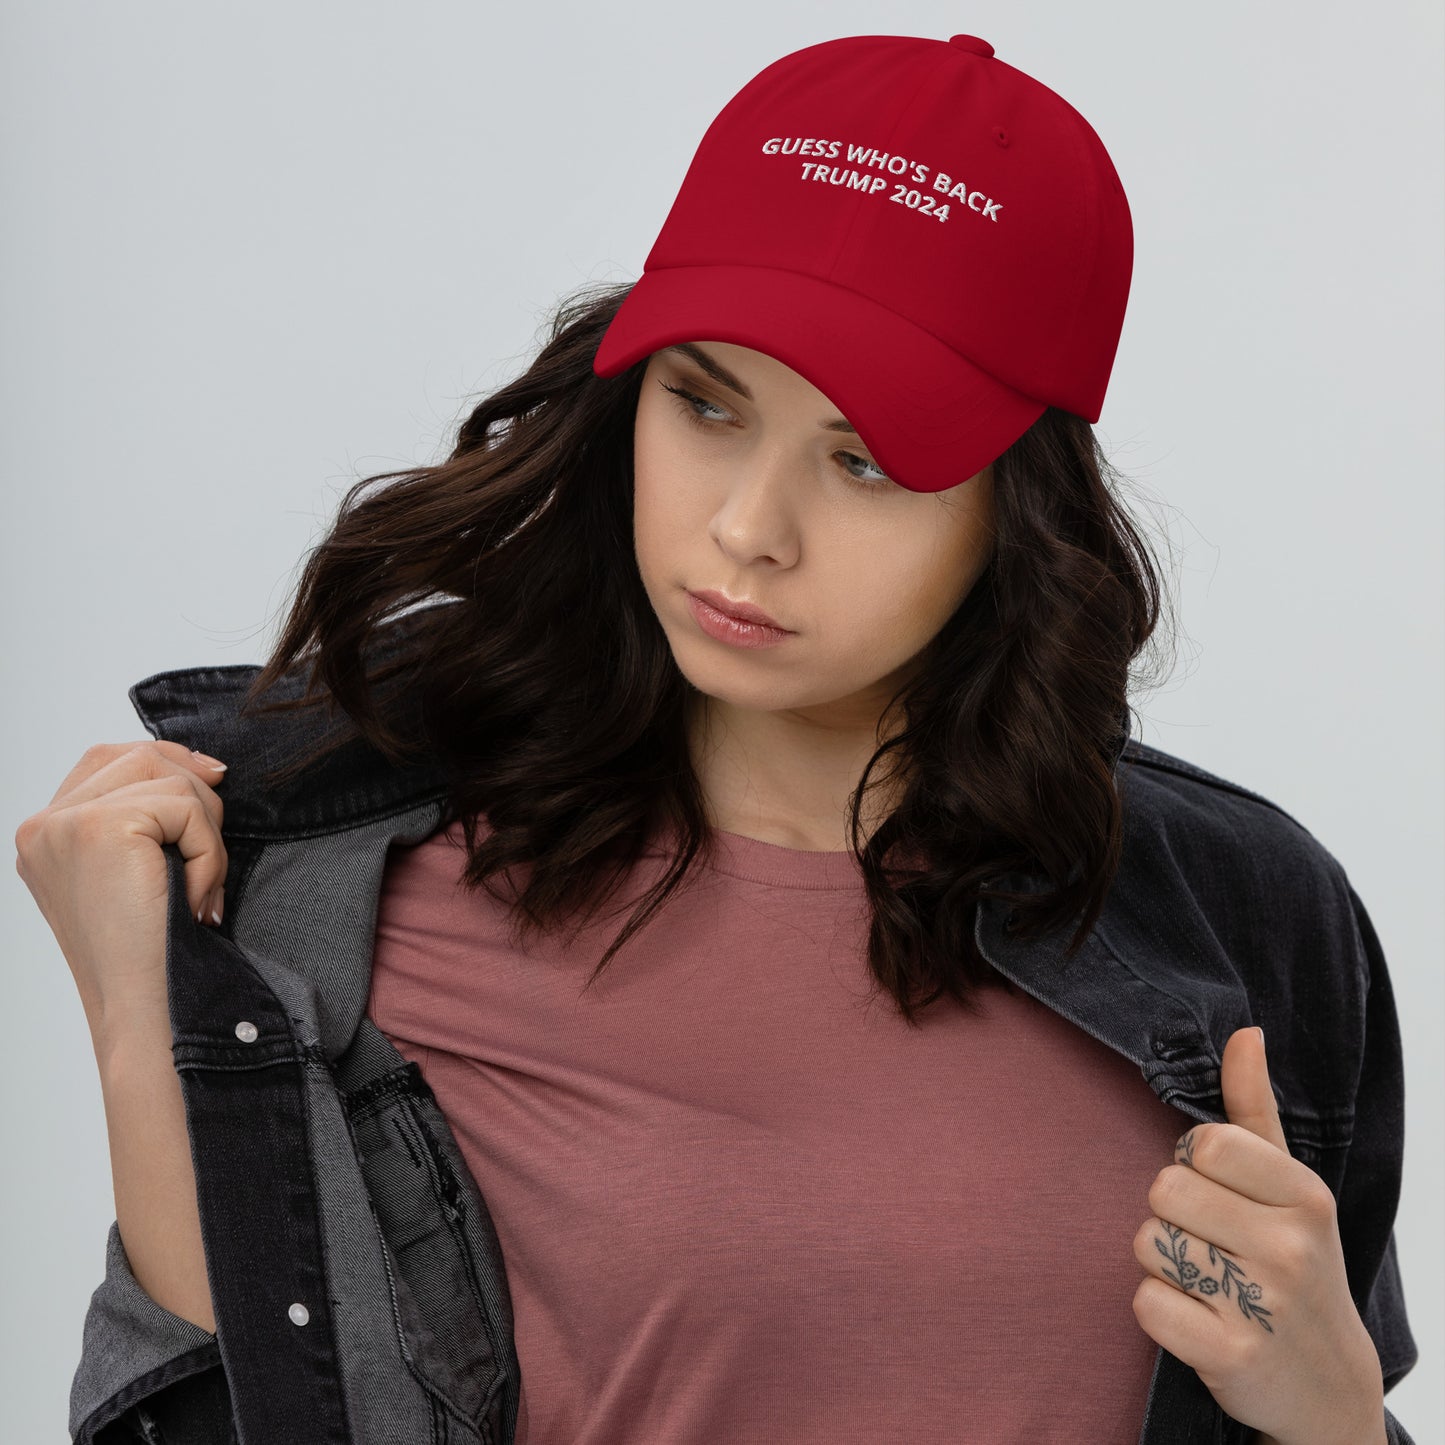 GUESS WHO'S BACK TRUMP 2024  hat